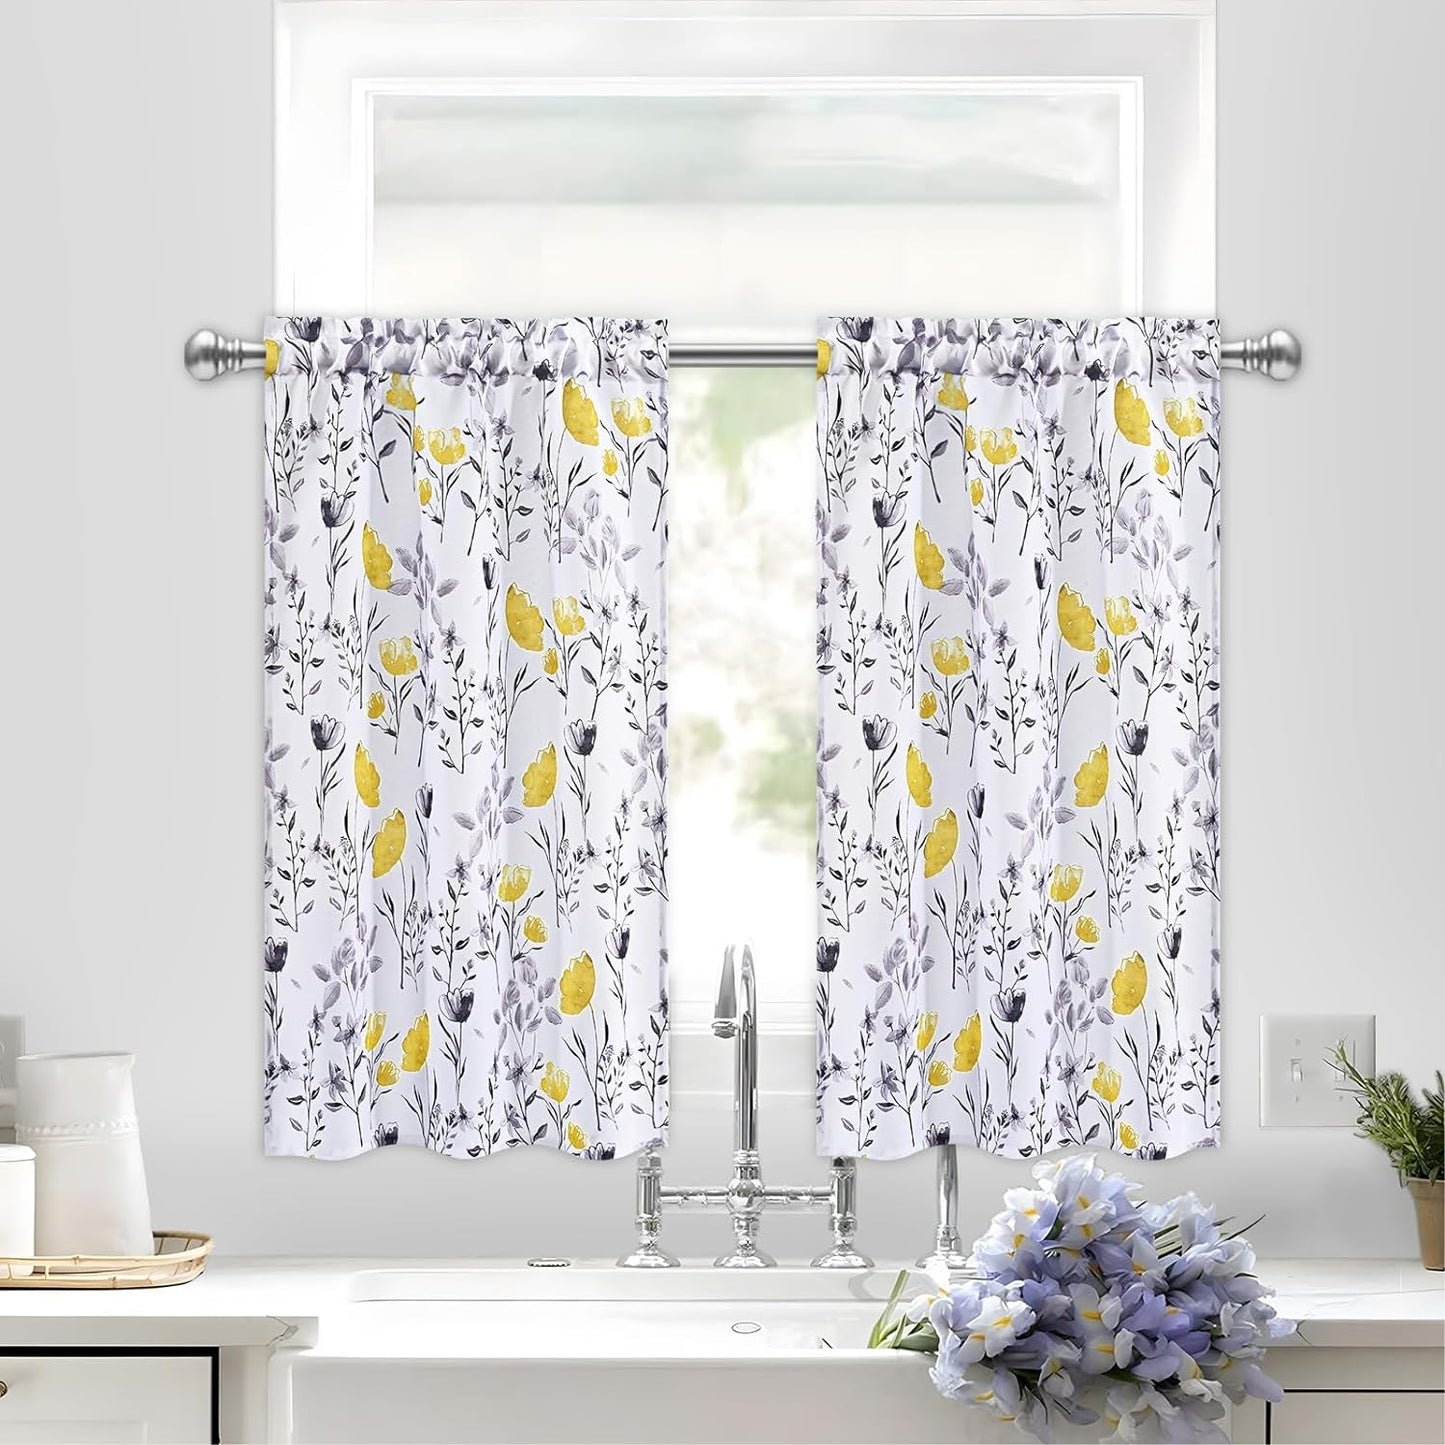 Likiyol Floral Kithchen Curtains 36 Inch Watercolor Flower Leaves Tier Curtains, Yellow and Gray Floral Cafe Curtains, Rod Pocket Small Window Curtain for Cafe Bathroom Bedroom Drapes  Likiyol   